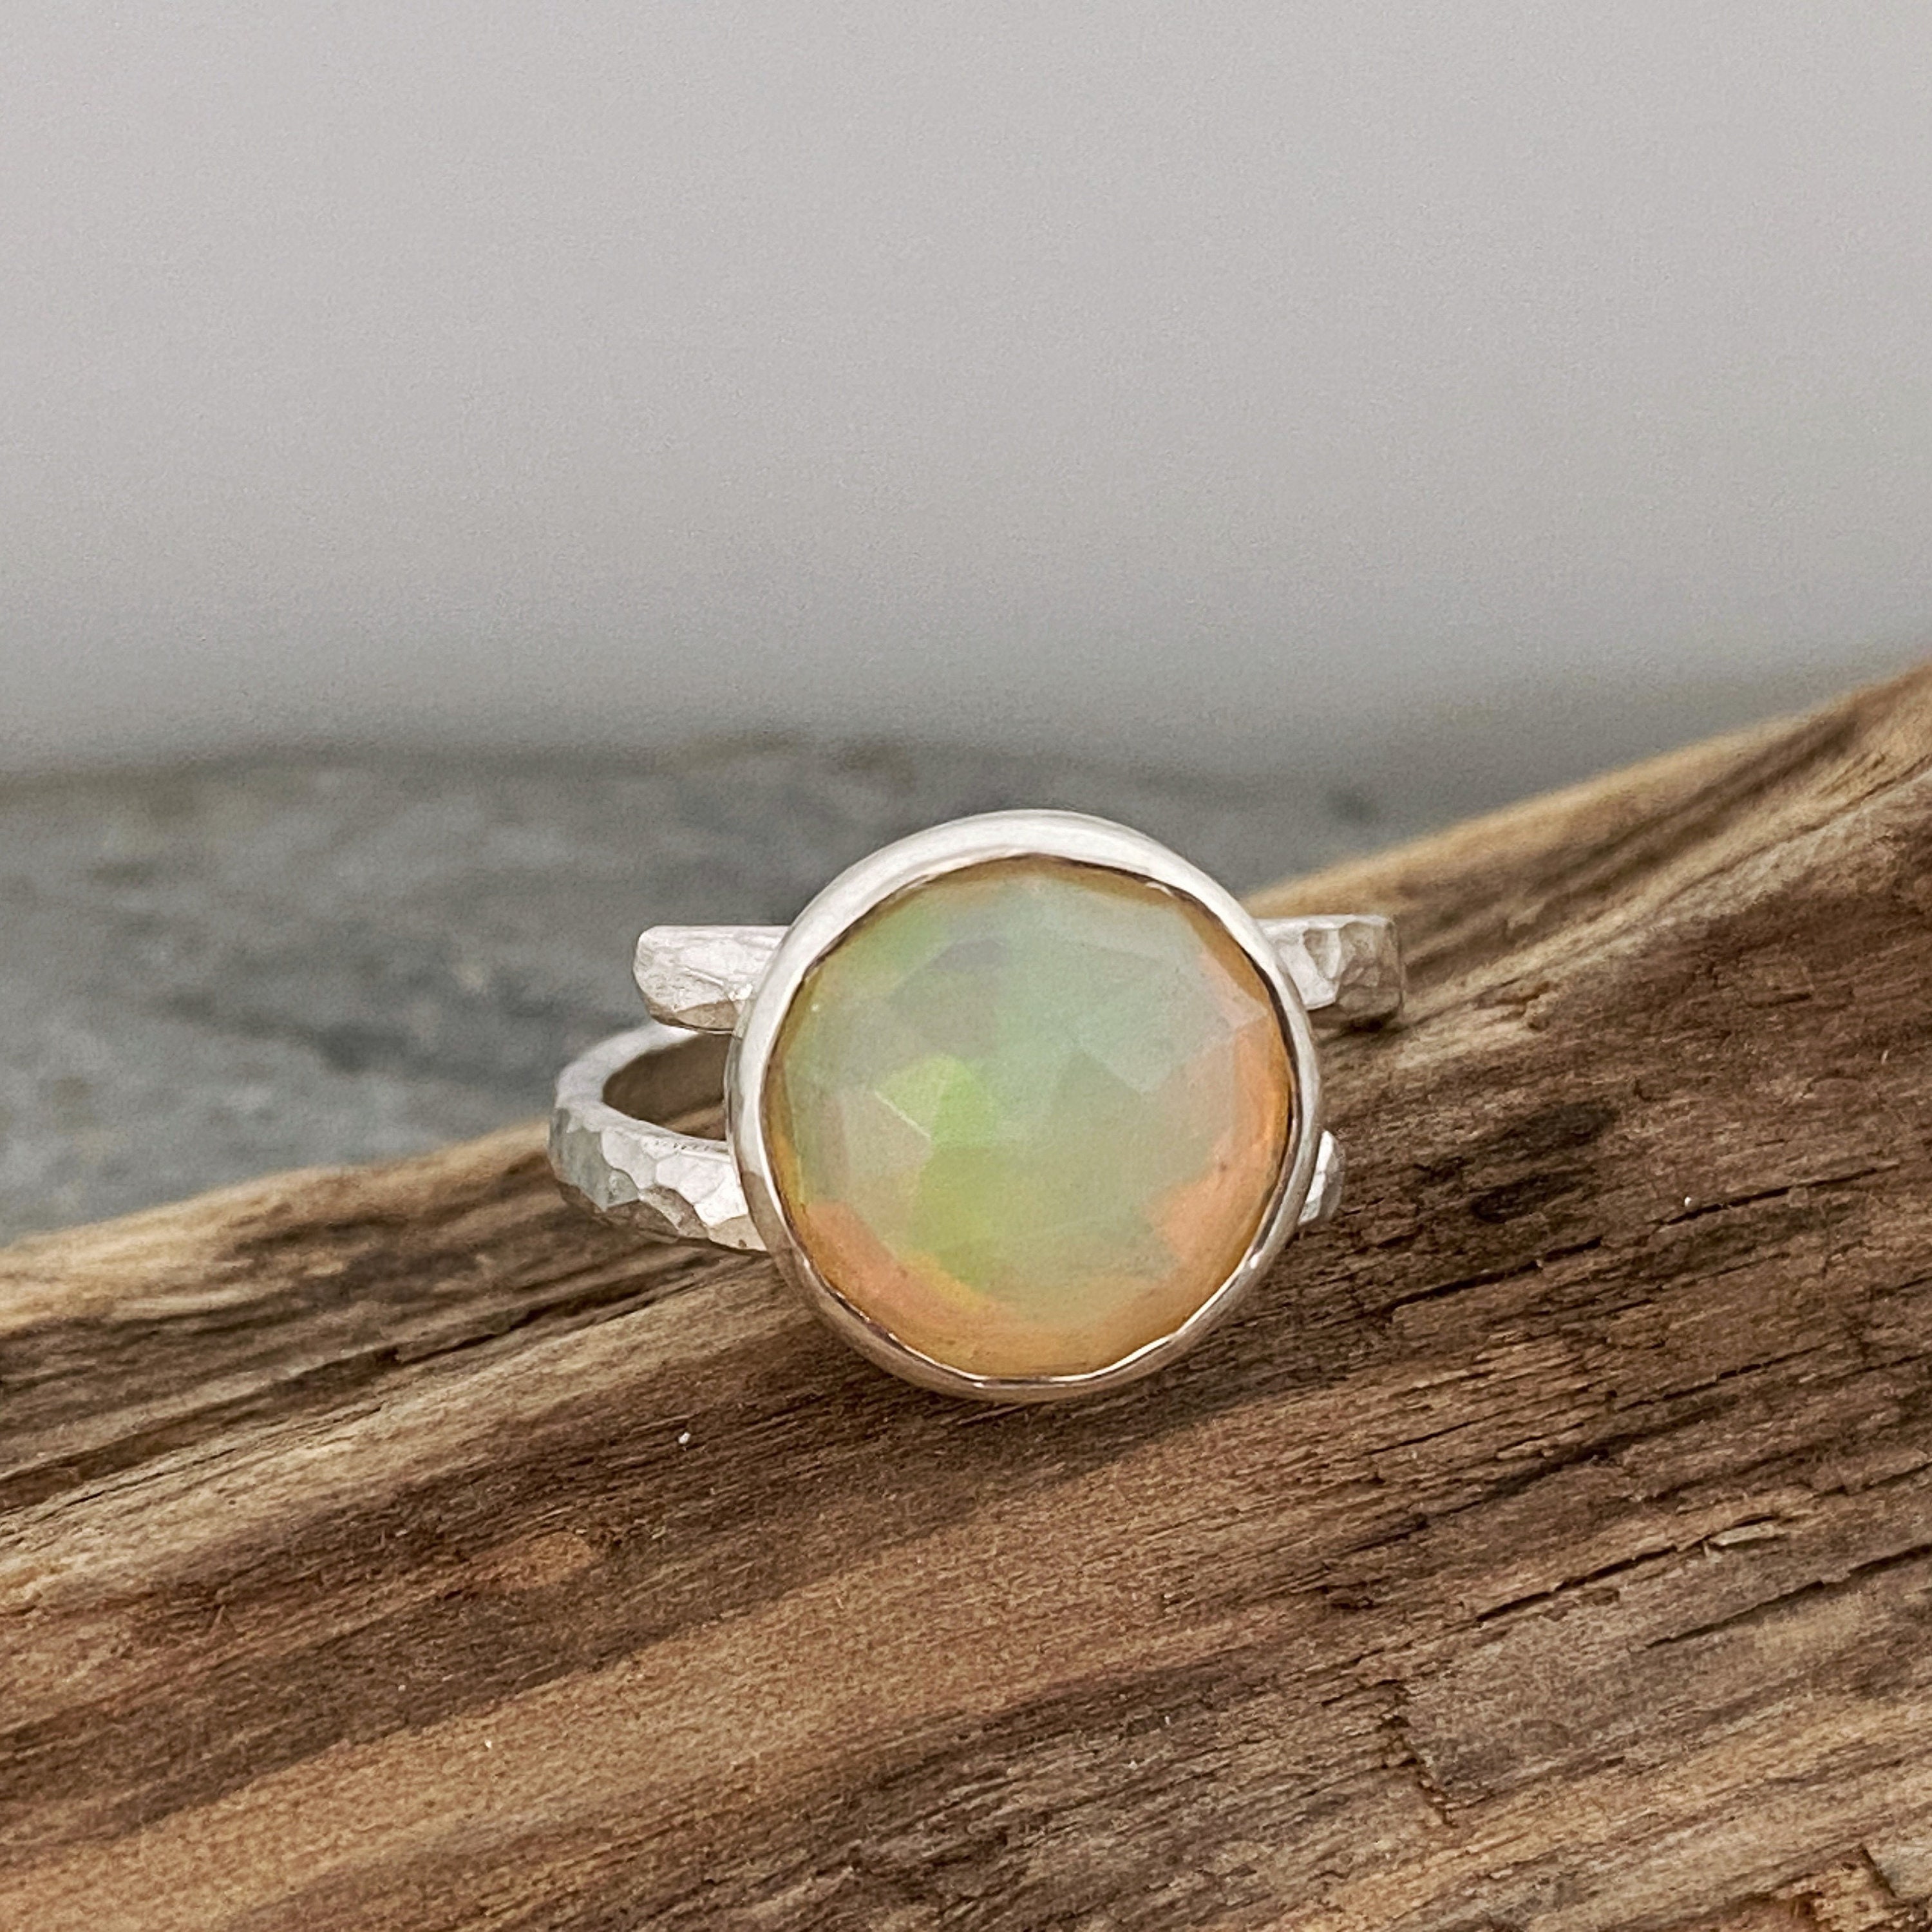 Stunning Ethiopian Opal Statement Ring. Wrap Around Silver Ring Band Set With A Large Stone. Chunky